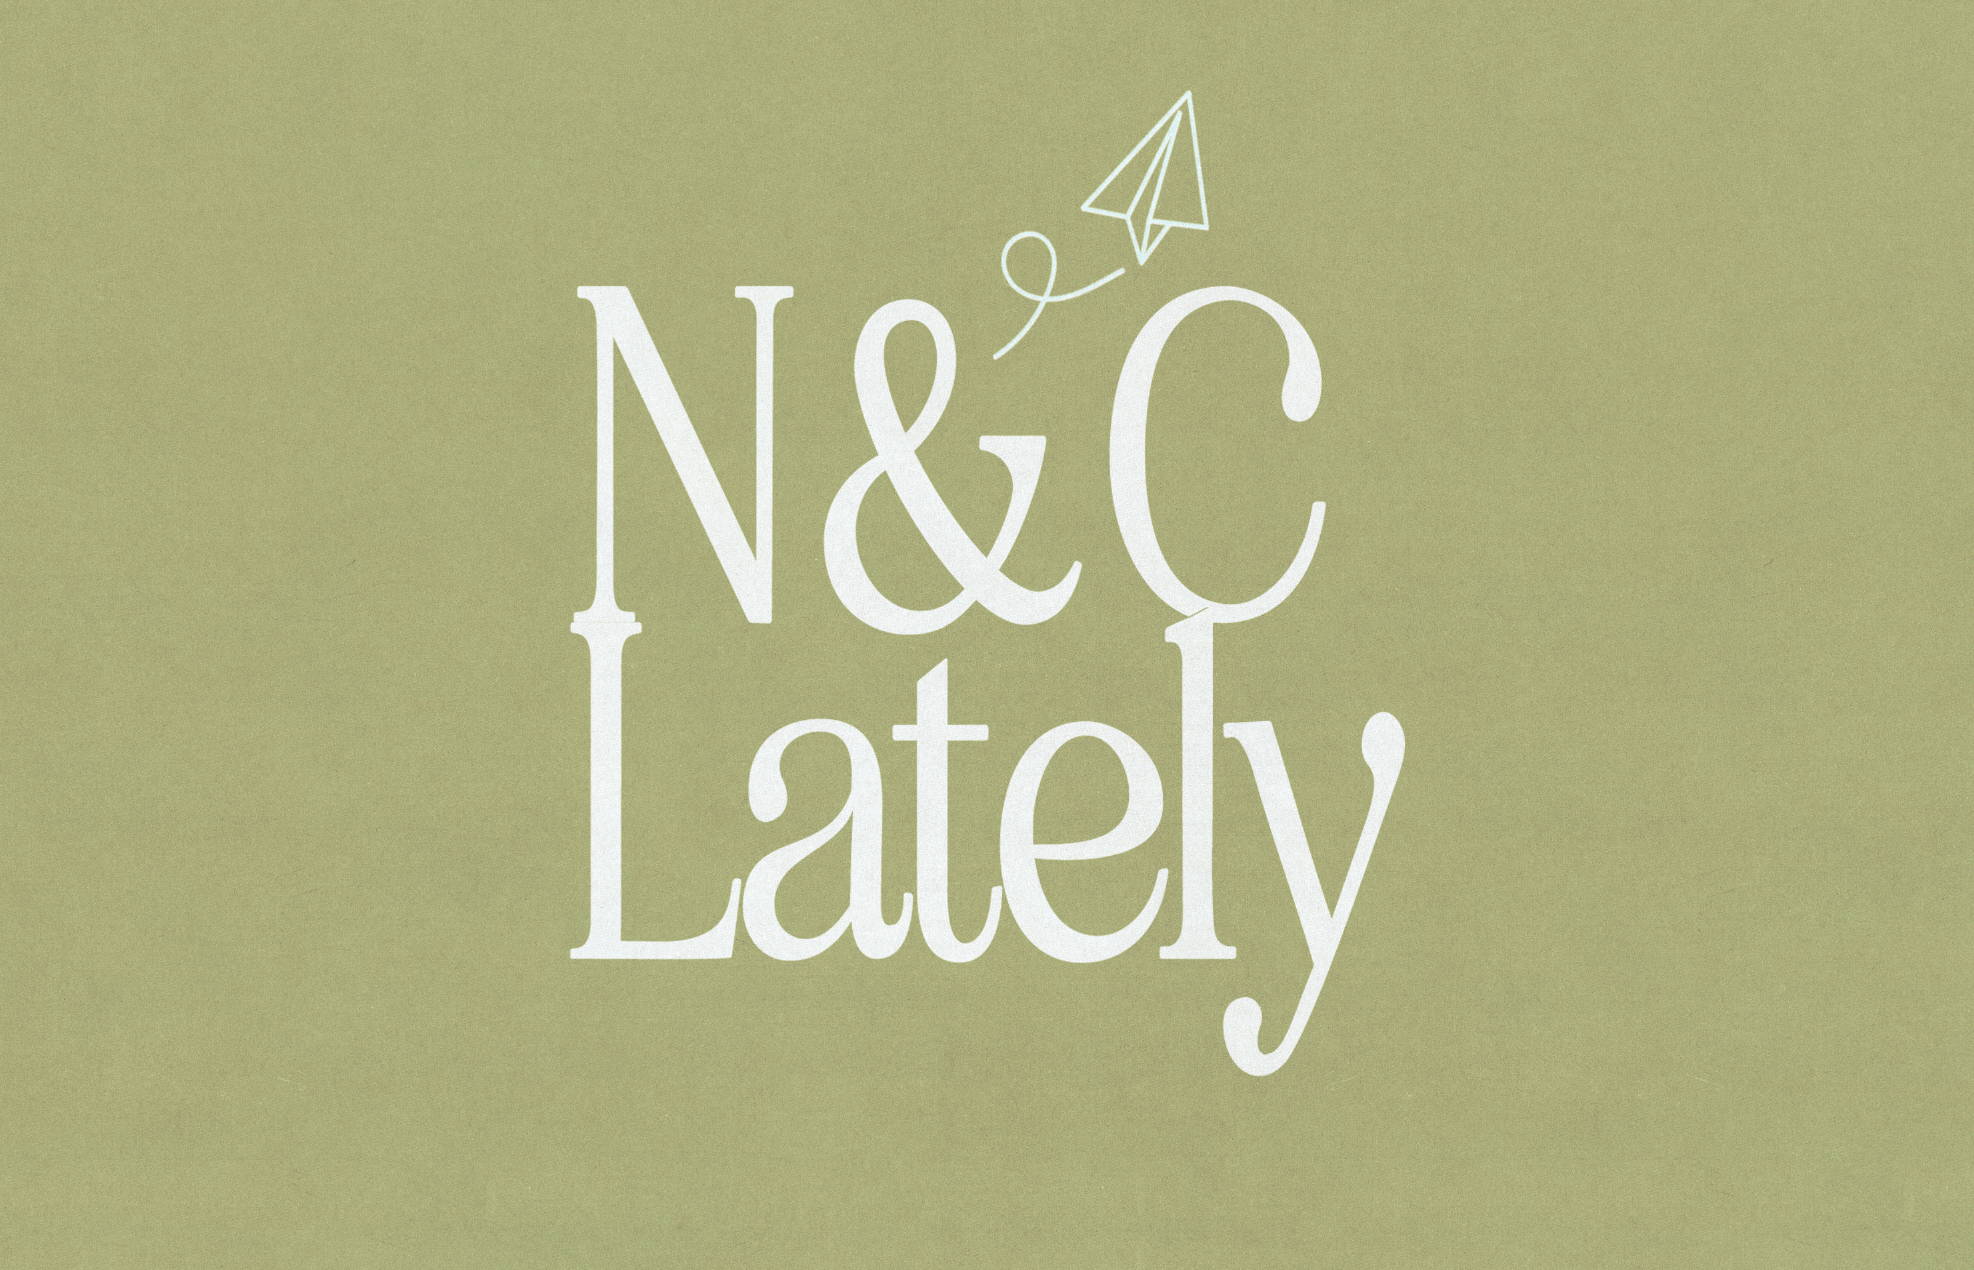 N&C Lately - Issue 01